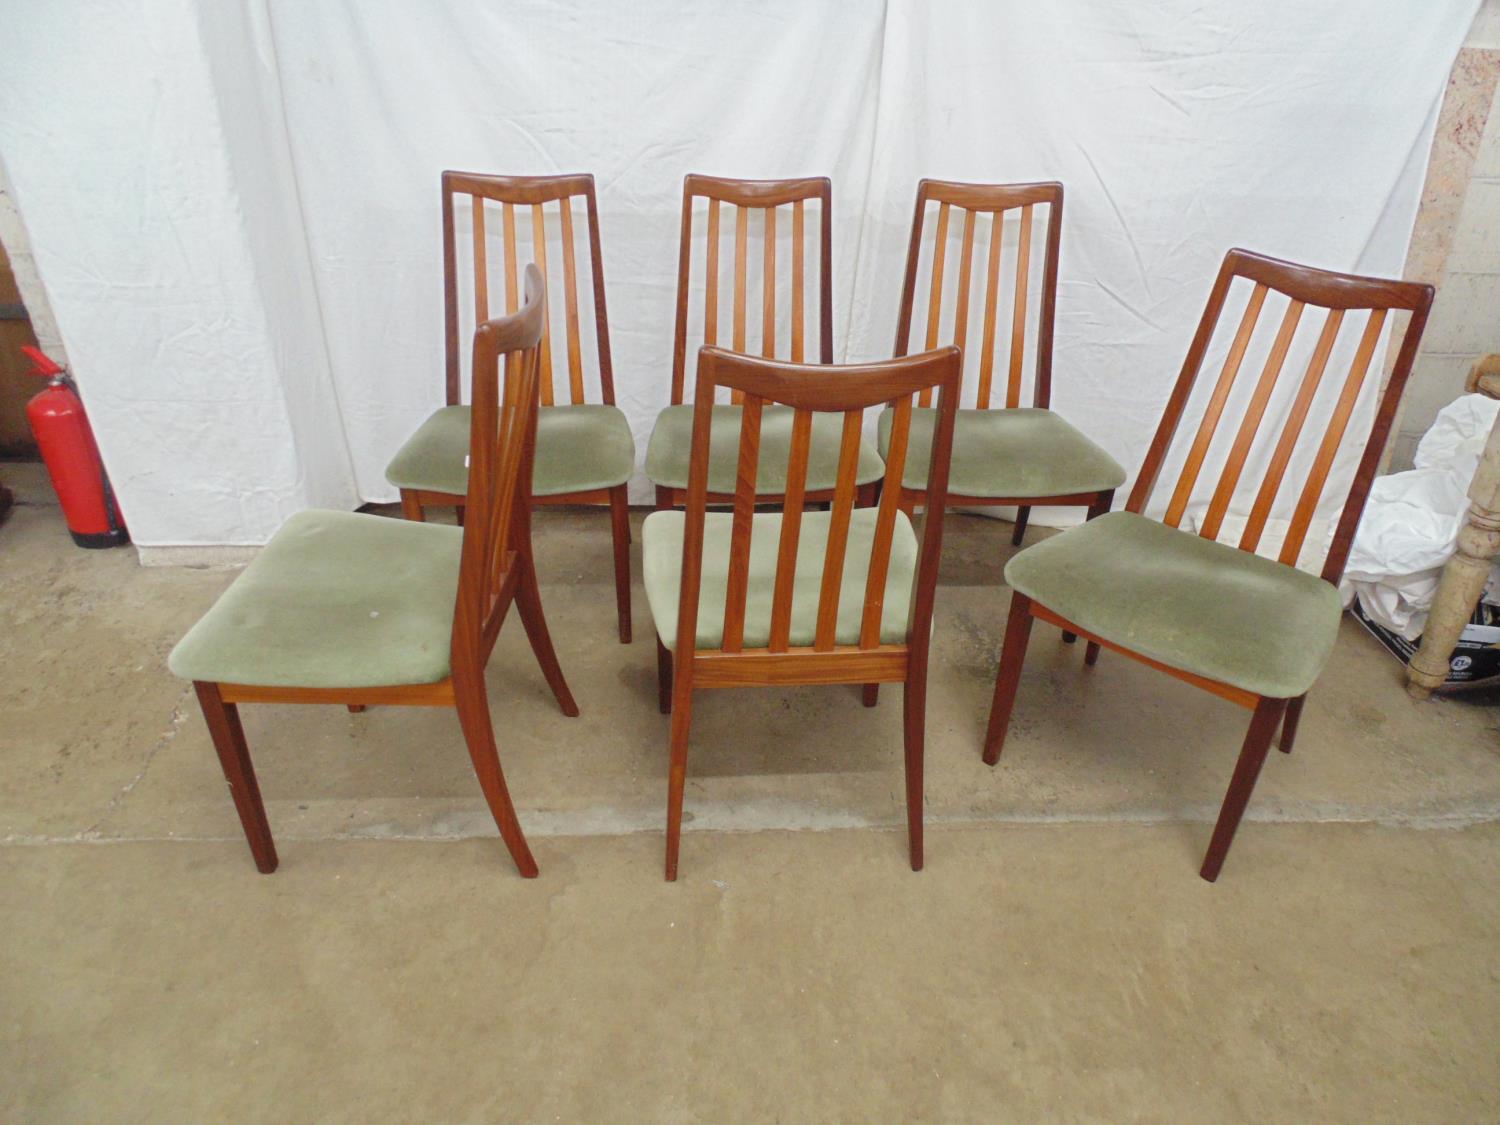 Set of six mid century G-Plan teak dining chairs having slatted backs and padded seats, standing - Image 6 of 6